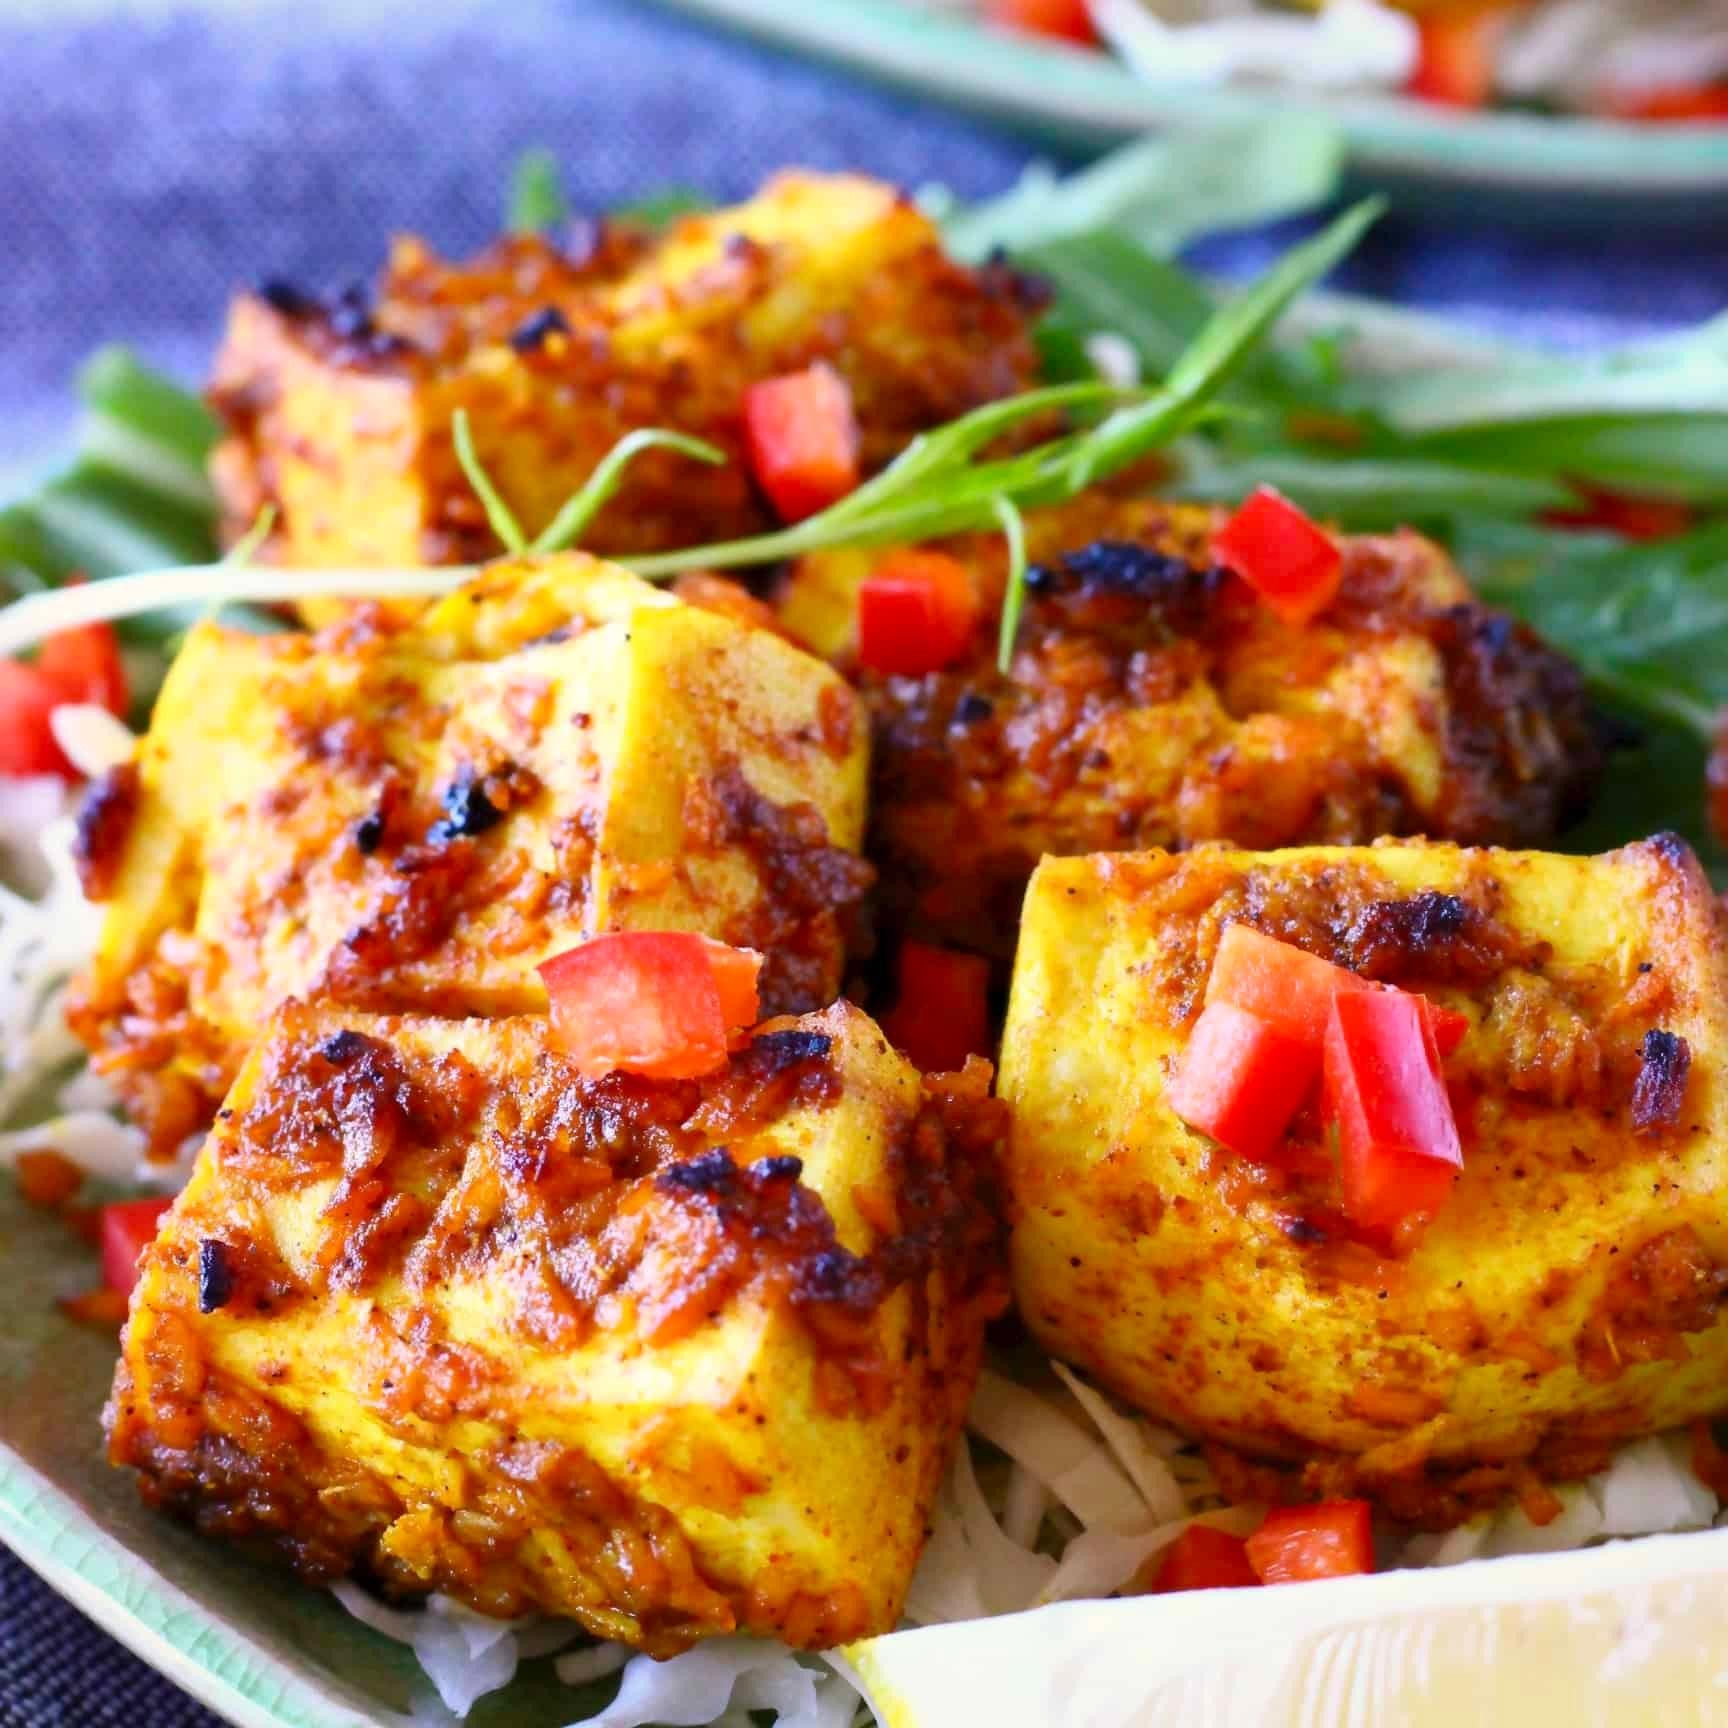 Sauteed Paneer (Contains Dairy)